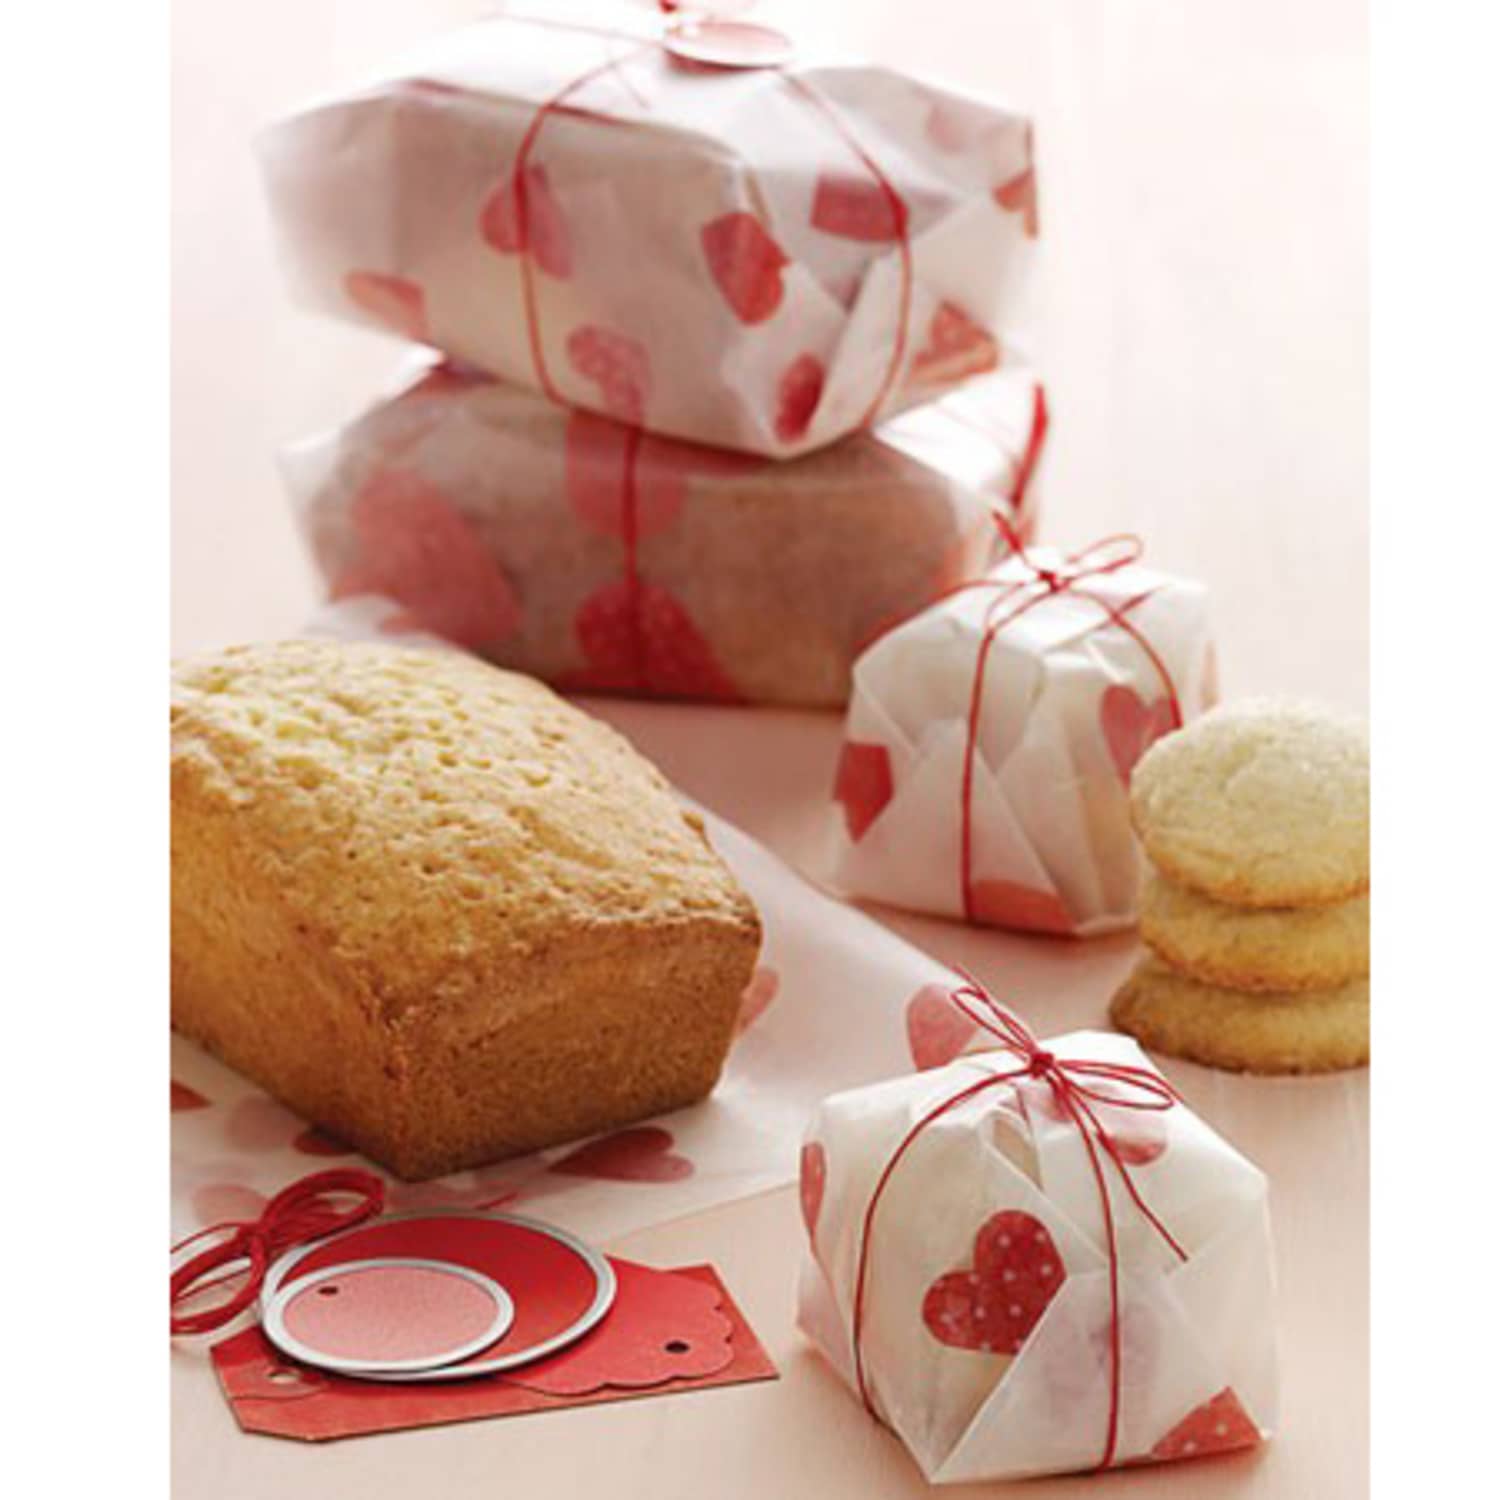 For Holiday Food Gifts: Make Custom Gift Wrappers With Wax Paper!